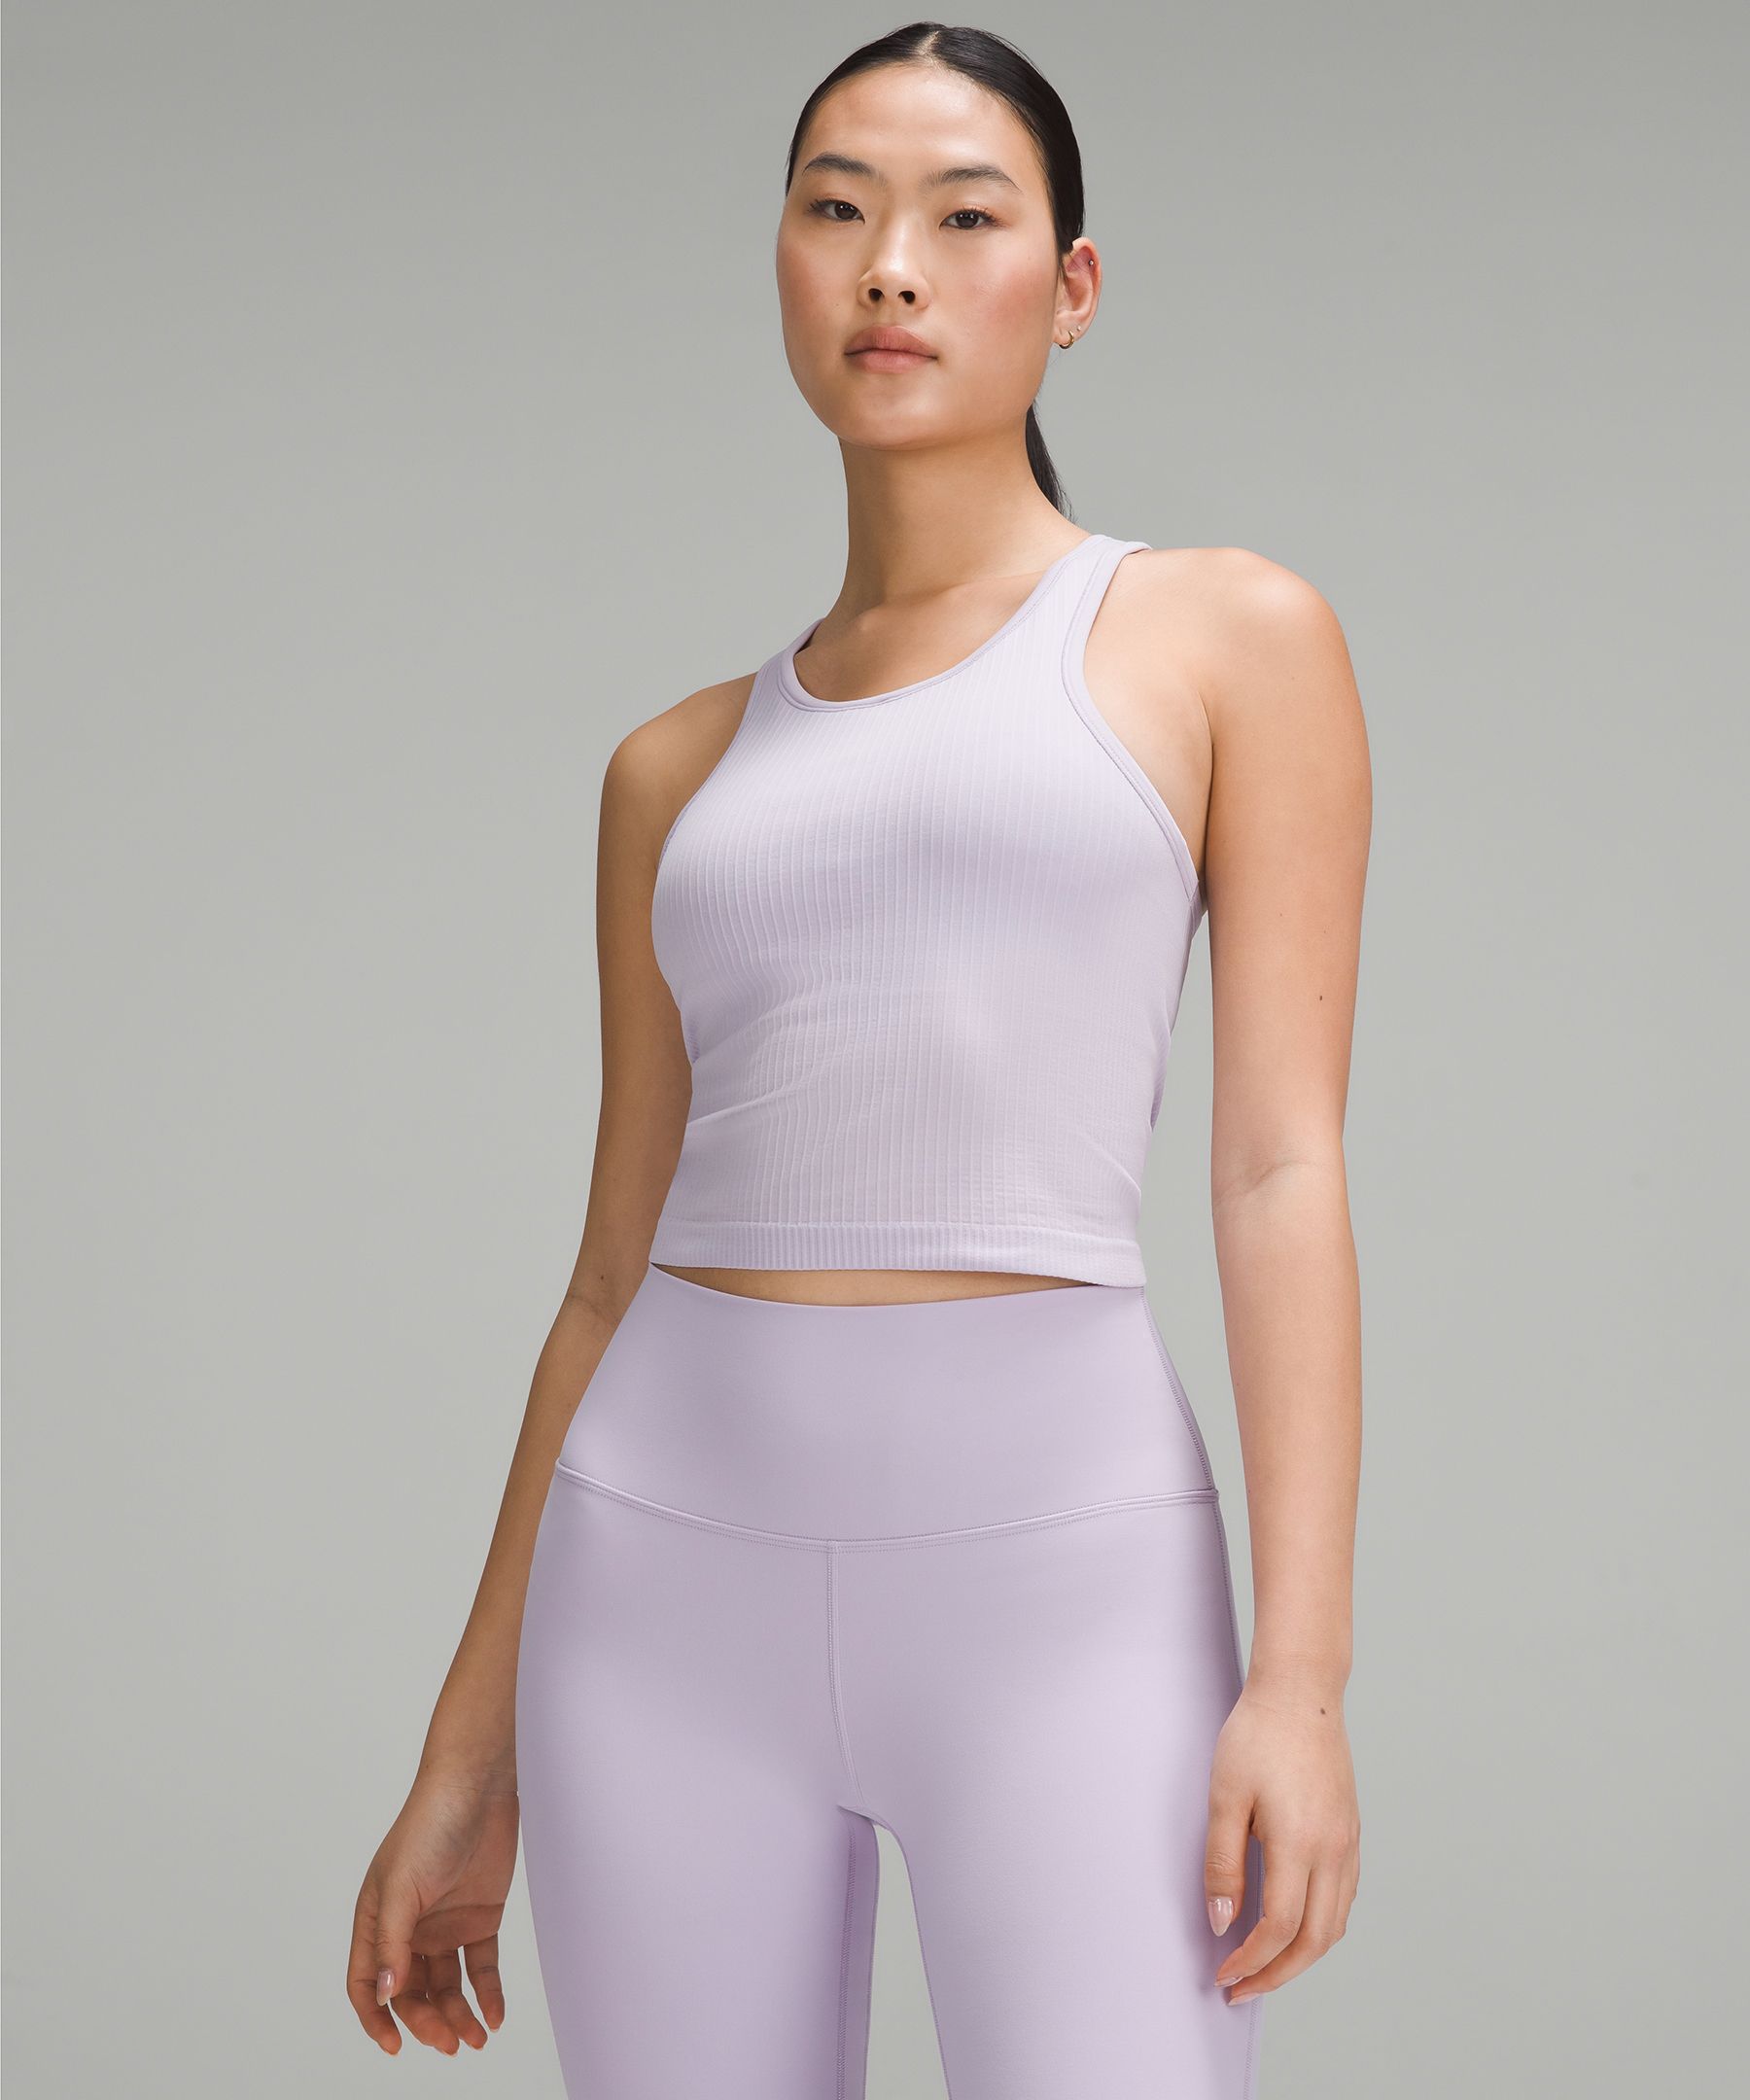 Lululemon Align HR Crop 21” NWT Sonic Pink Size 6 - $75 (14% Off Retail)  New With Tags - From Jacqueline